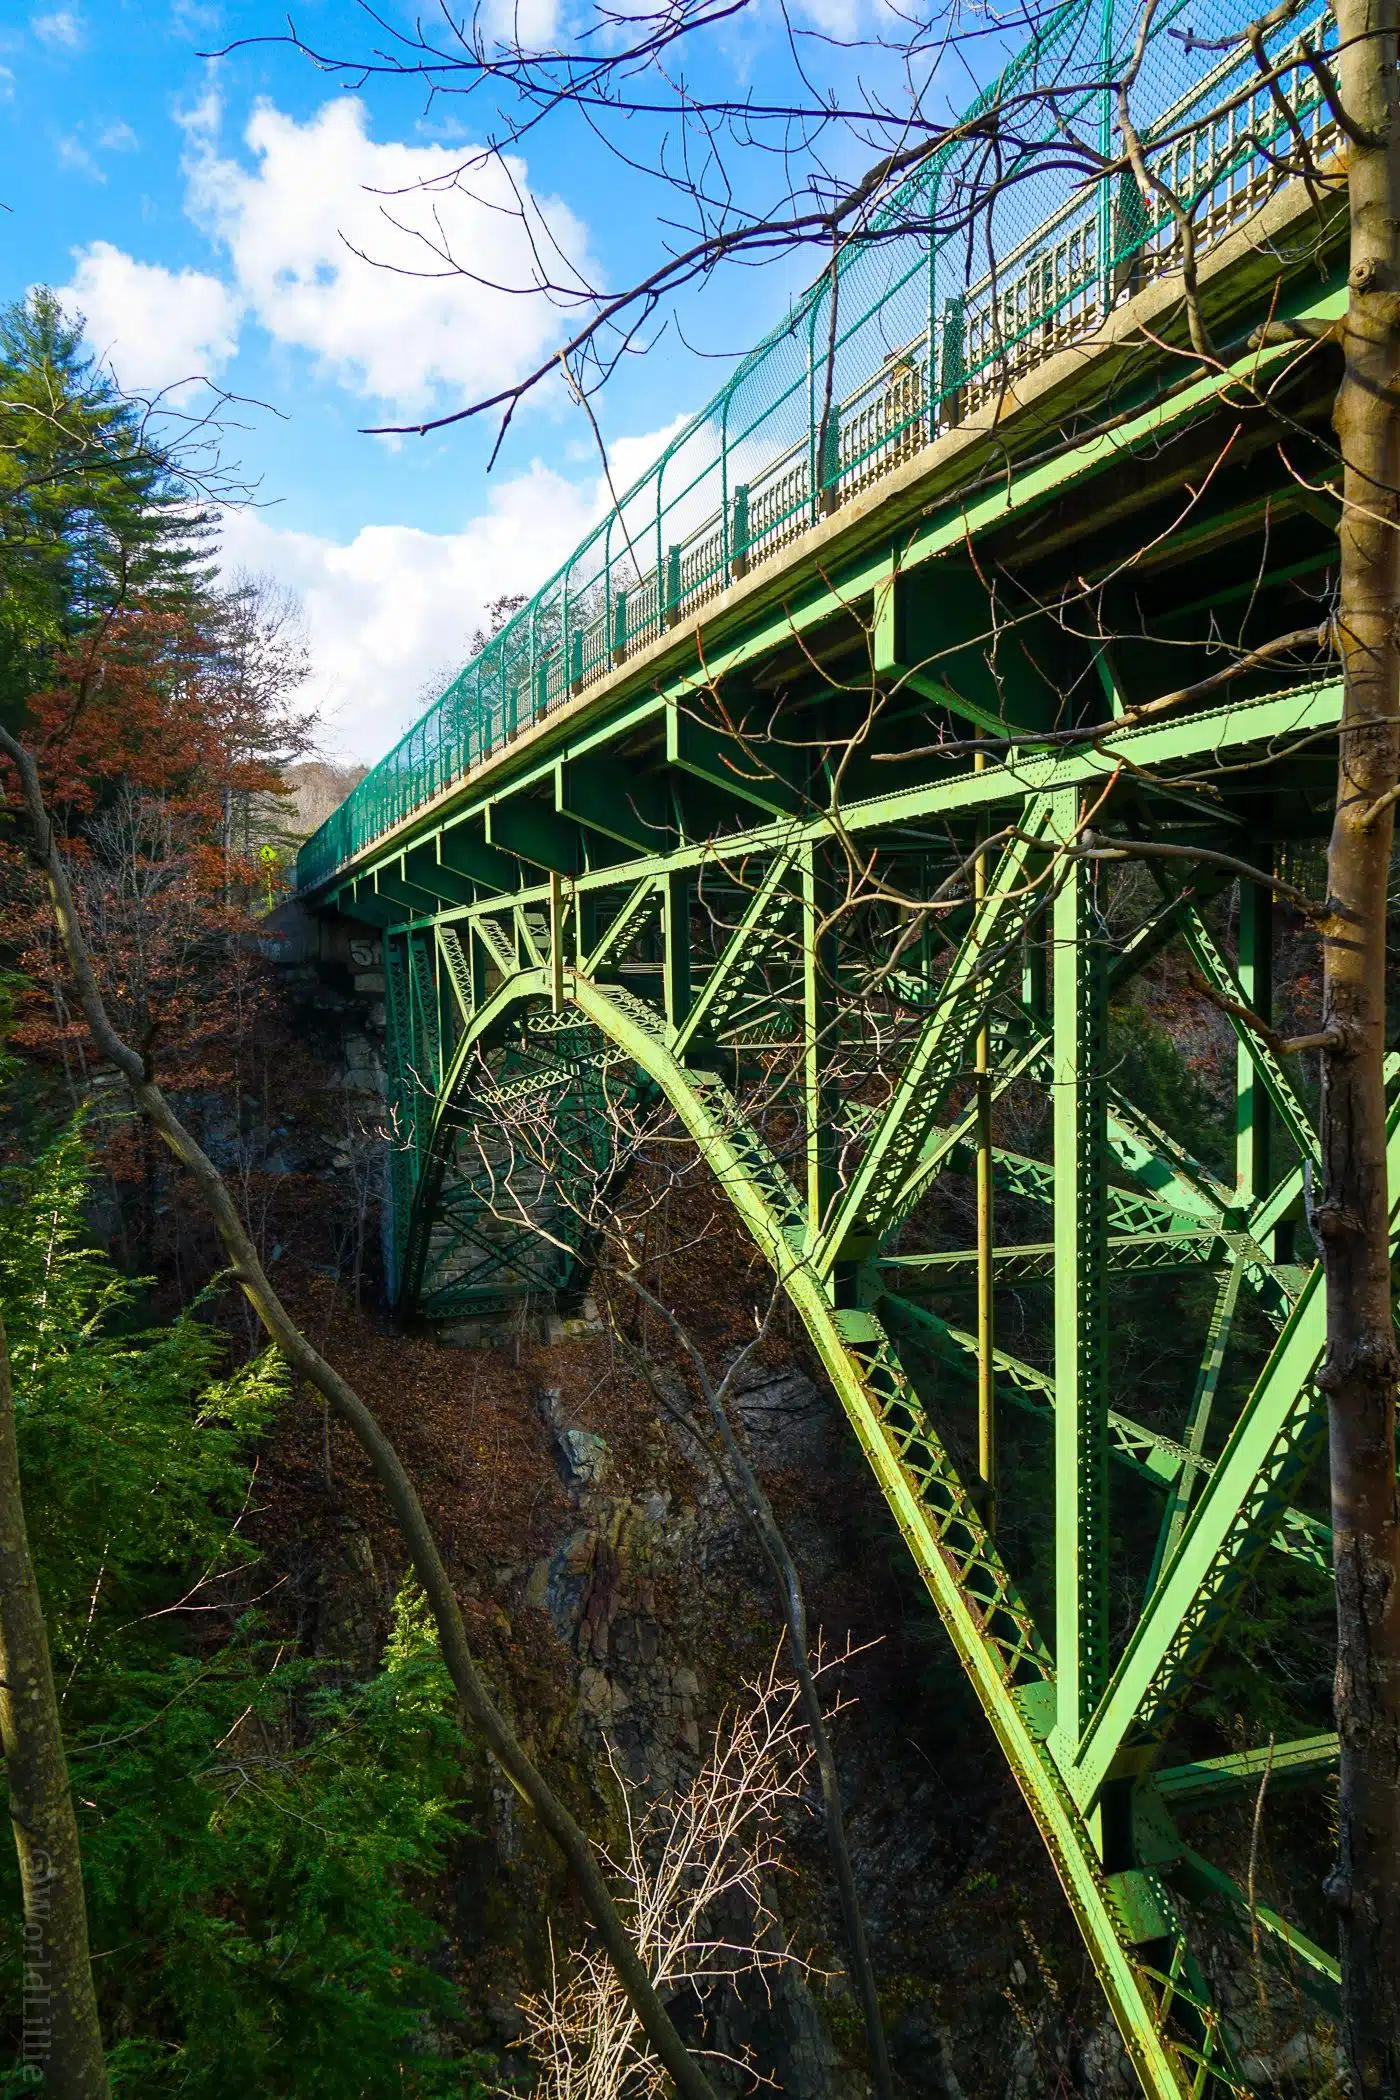 Quechee Gorge Bridge is historic! For a romantic New England getaway, or family travel fun, Woodstock, VT is a charming small town: Covered bridges, Billings Farm, Vermont skiing, and falconry!